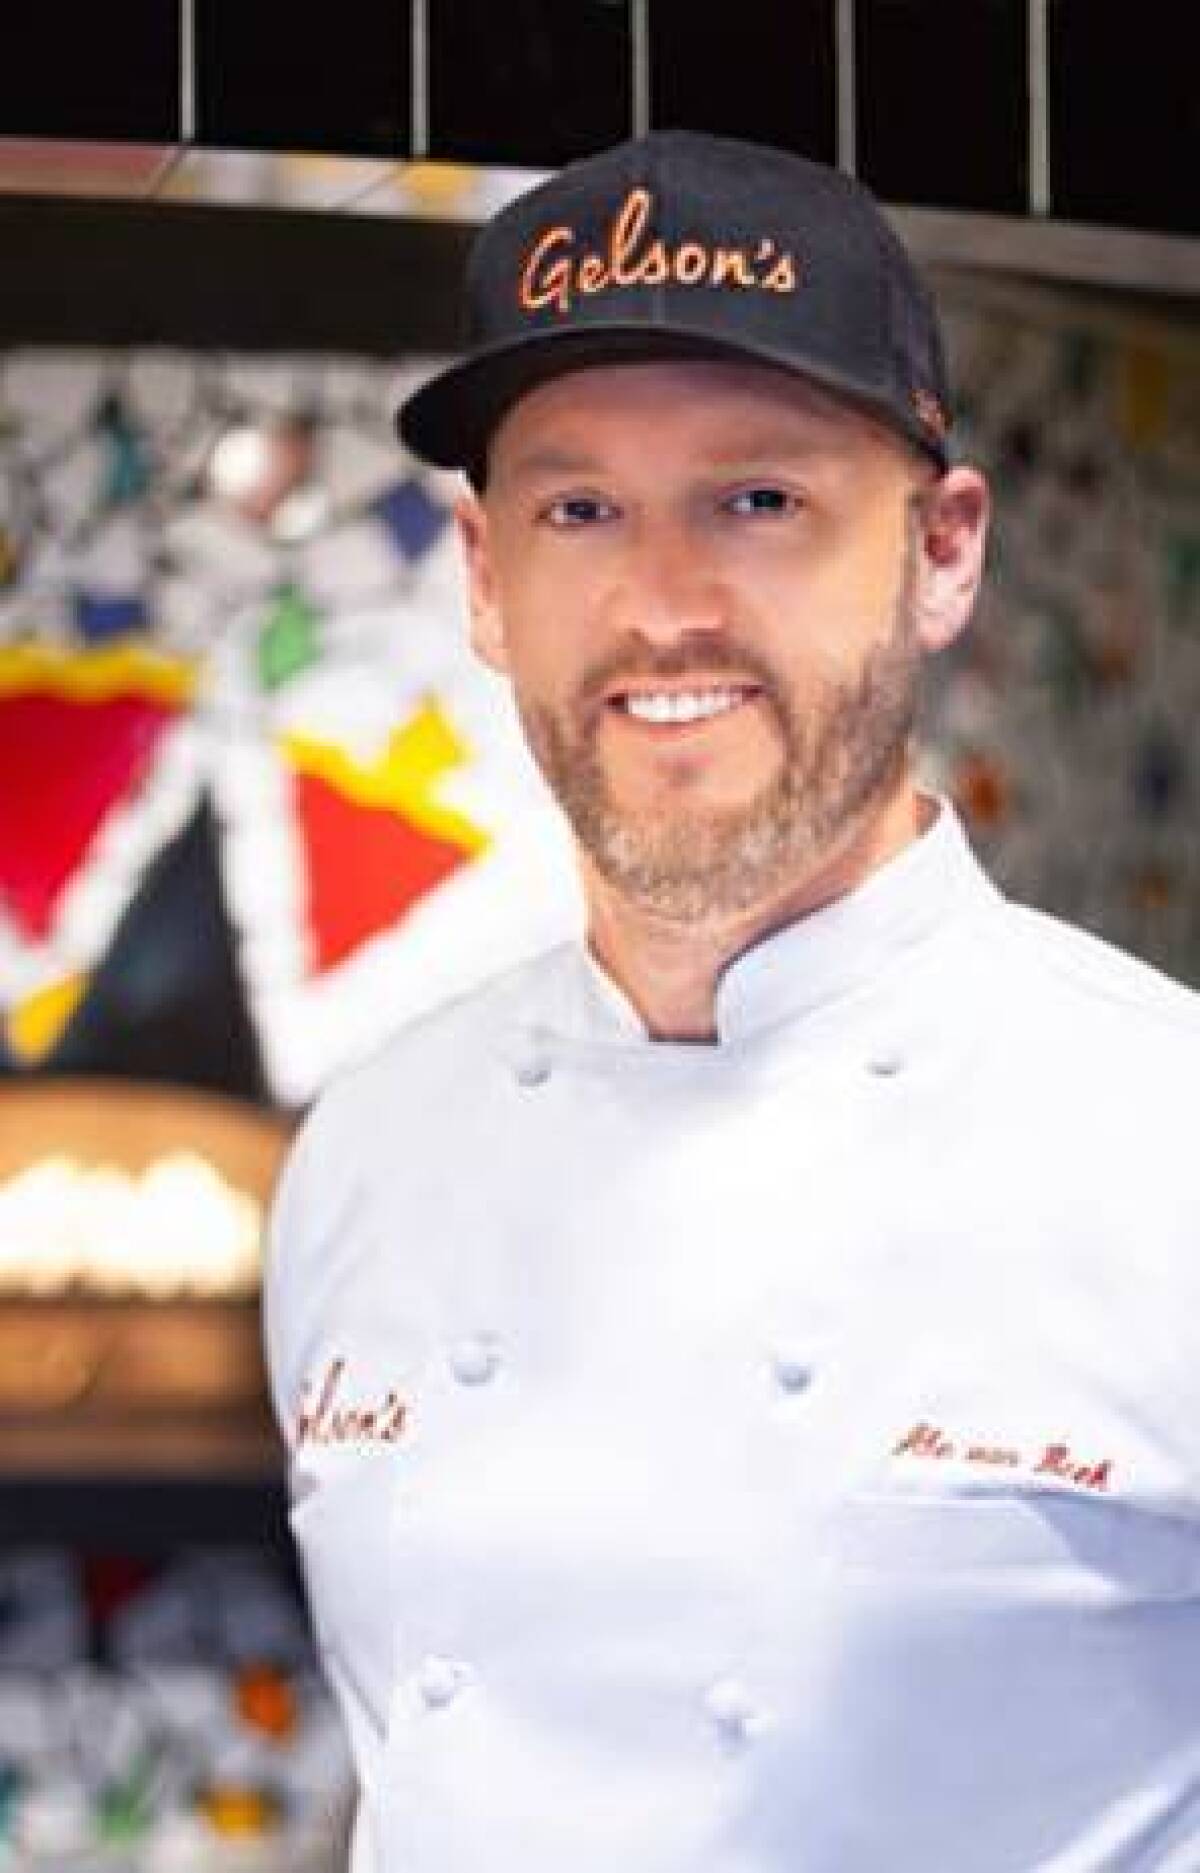 Gelson’s will present an online cooking class with corporate executive chef Abraham Van Beek on Thursday, Oct. 28.